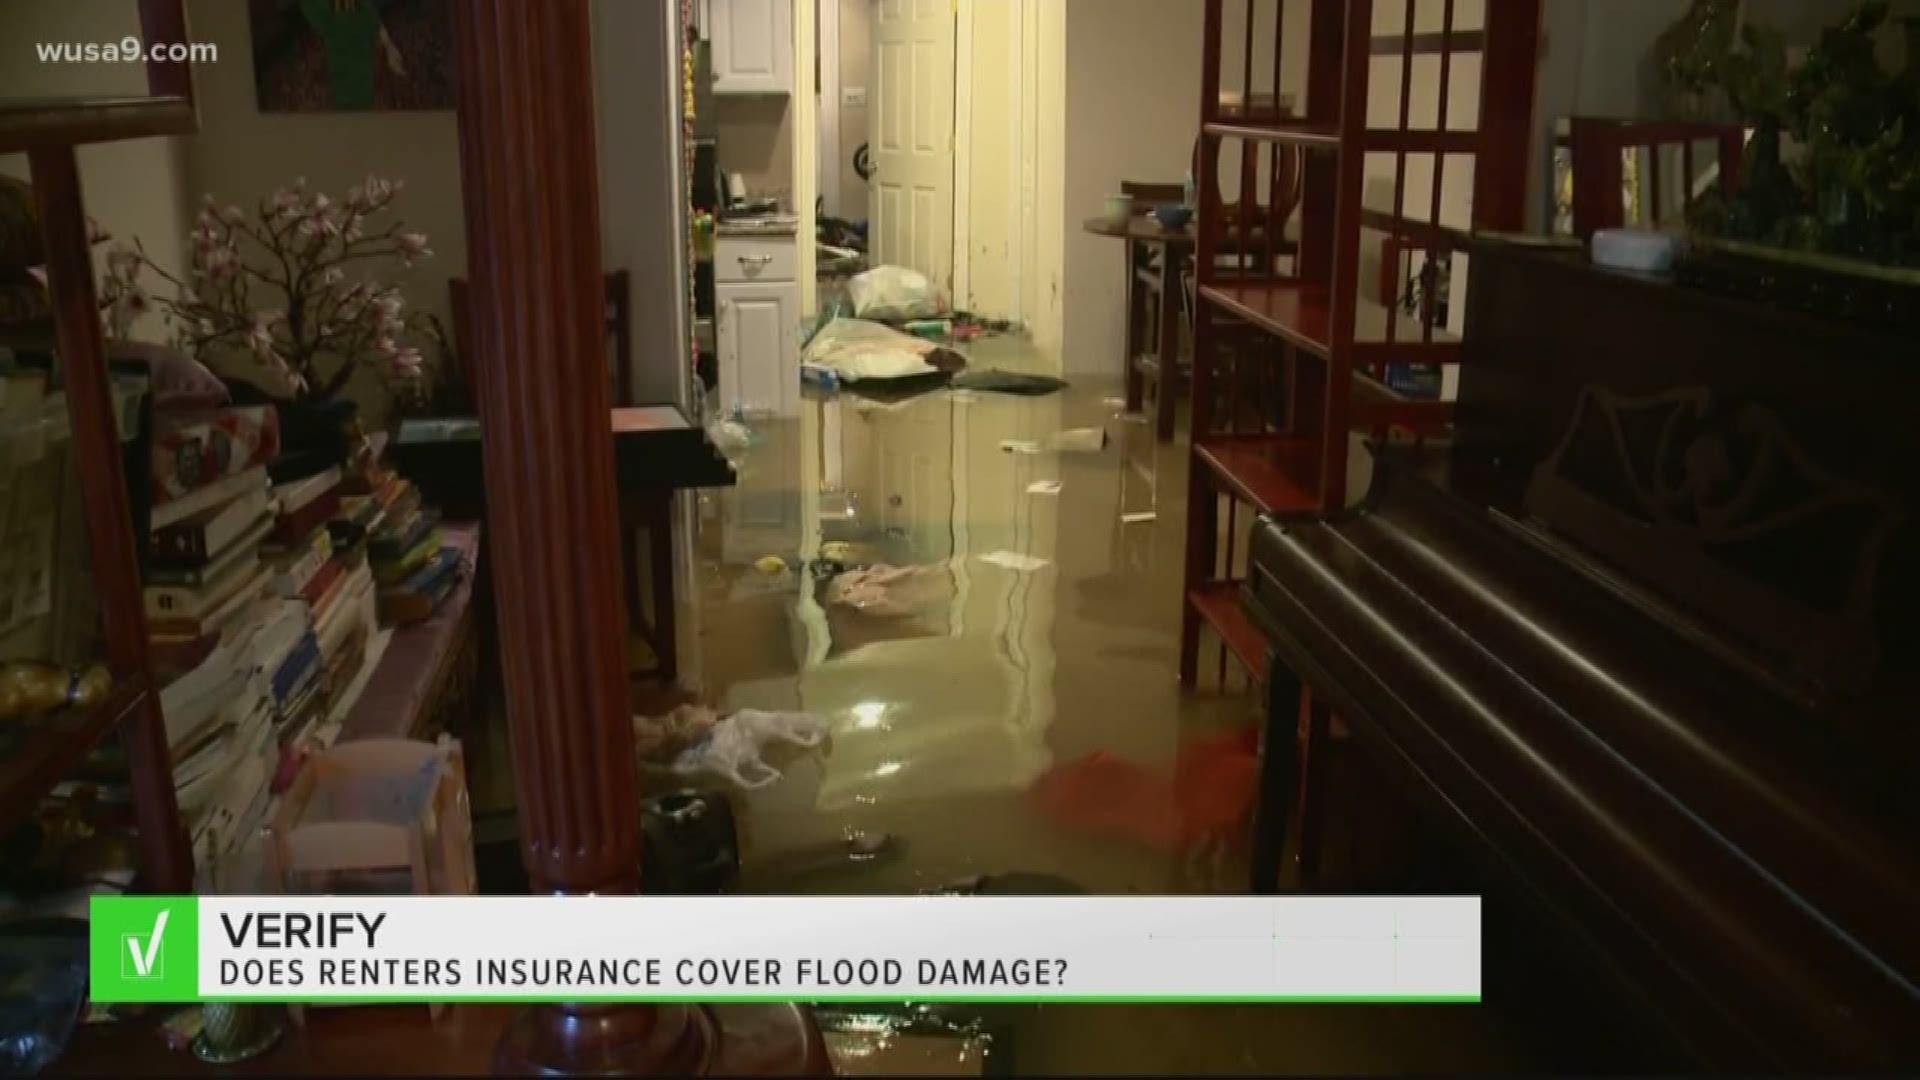 Most renters insurance policies do not cover damage from flood water.